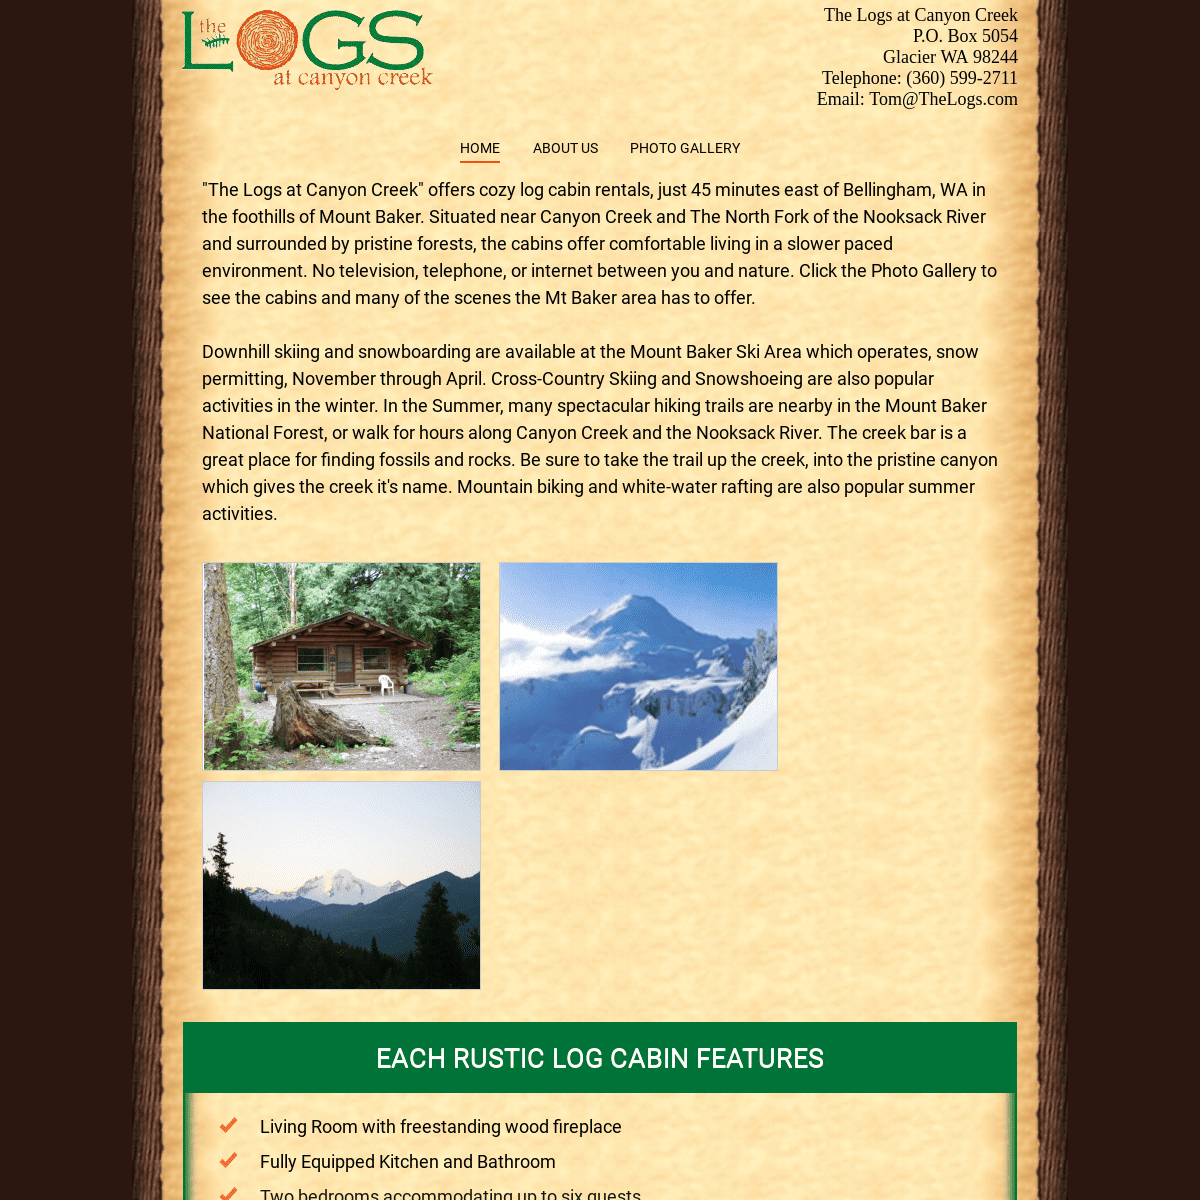 Home - The Logs at Canyon Creek